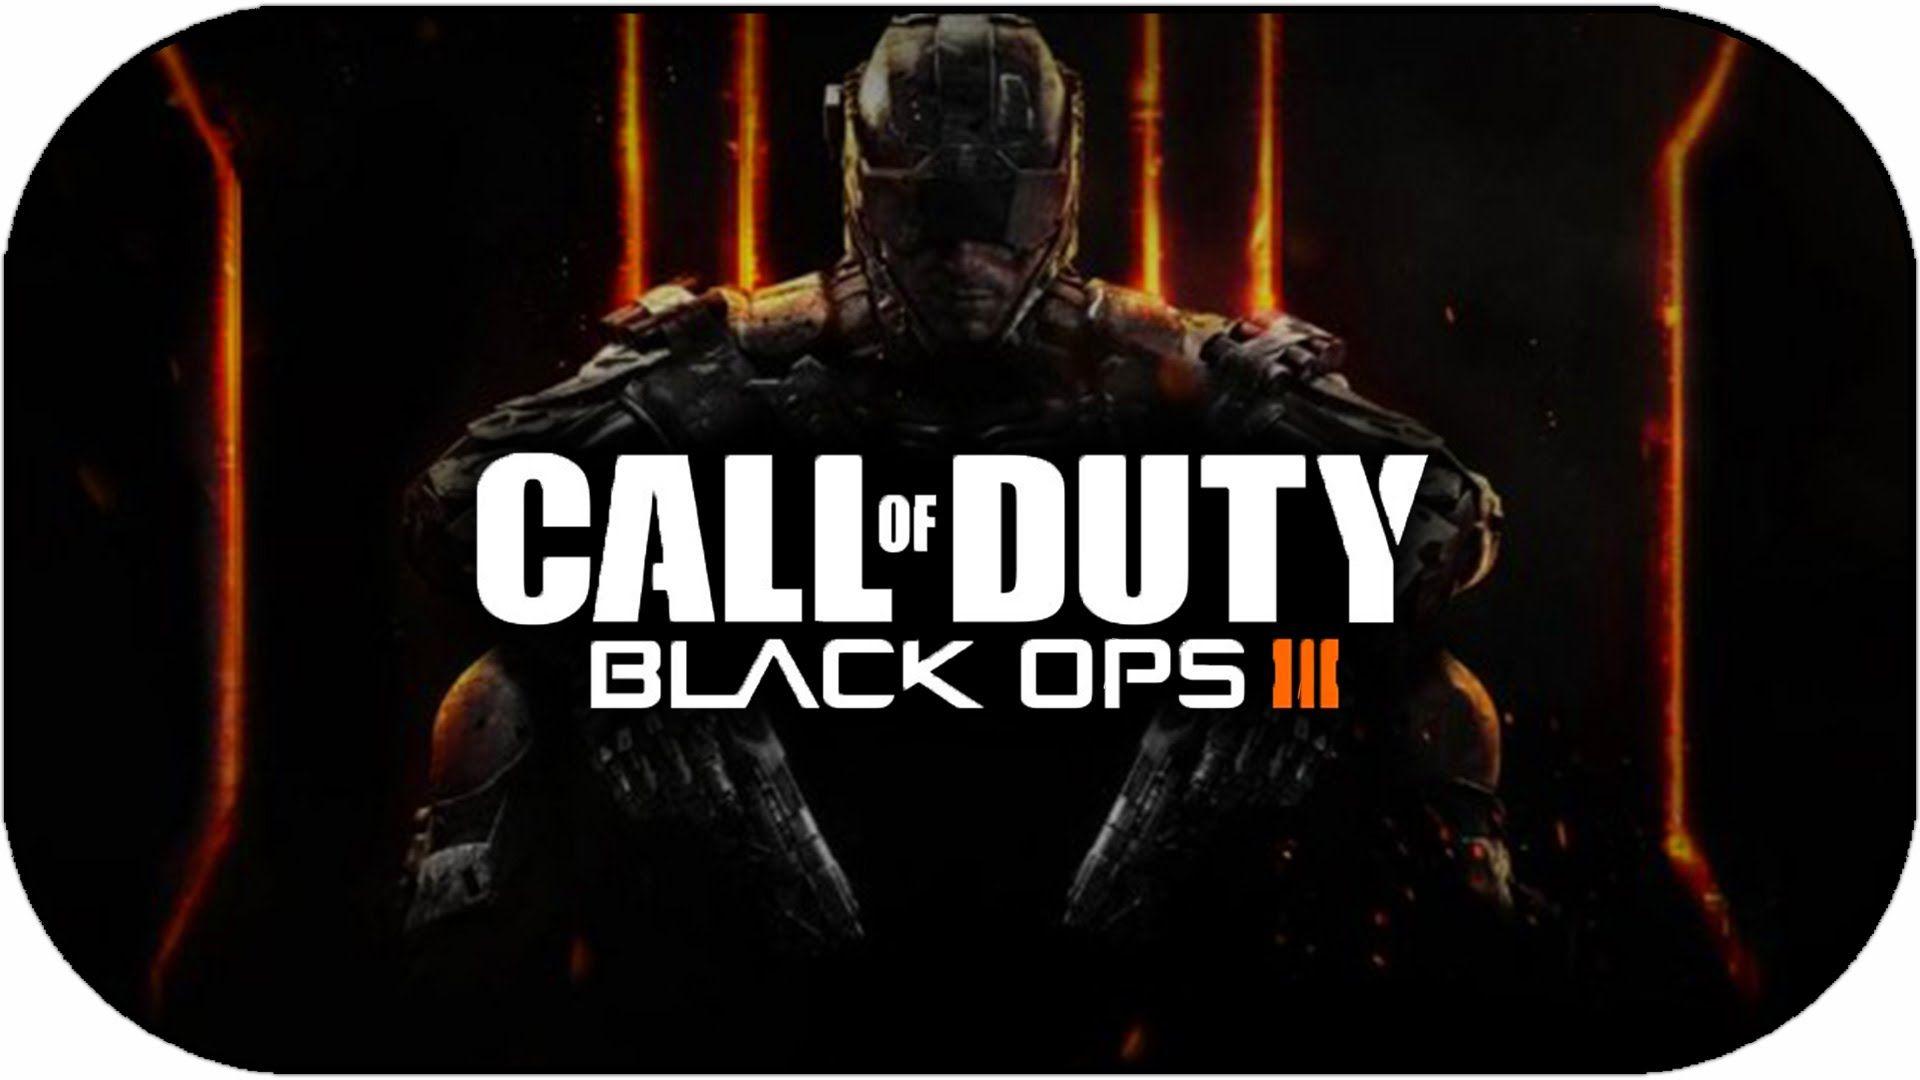 Call Of Duty Black Ops 3 Futuristic Multiplayer, Zombies & Image